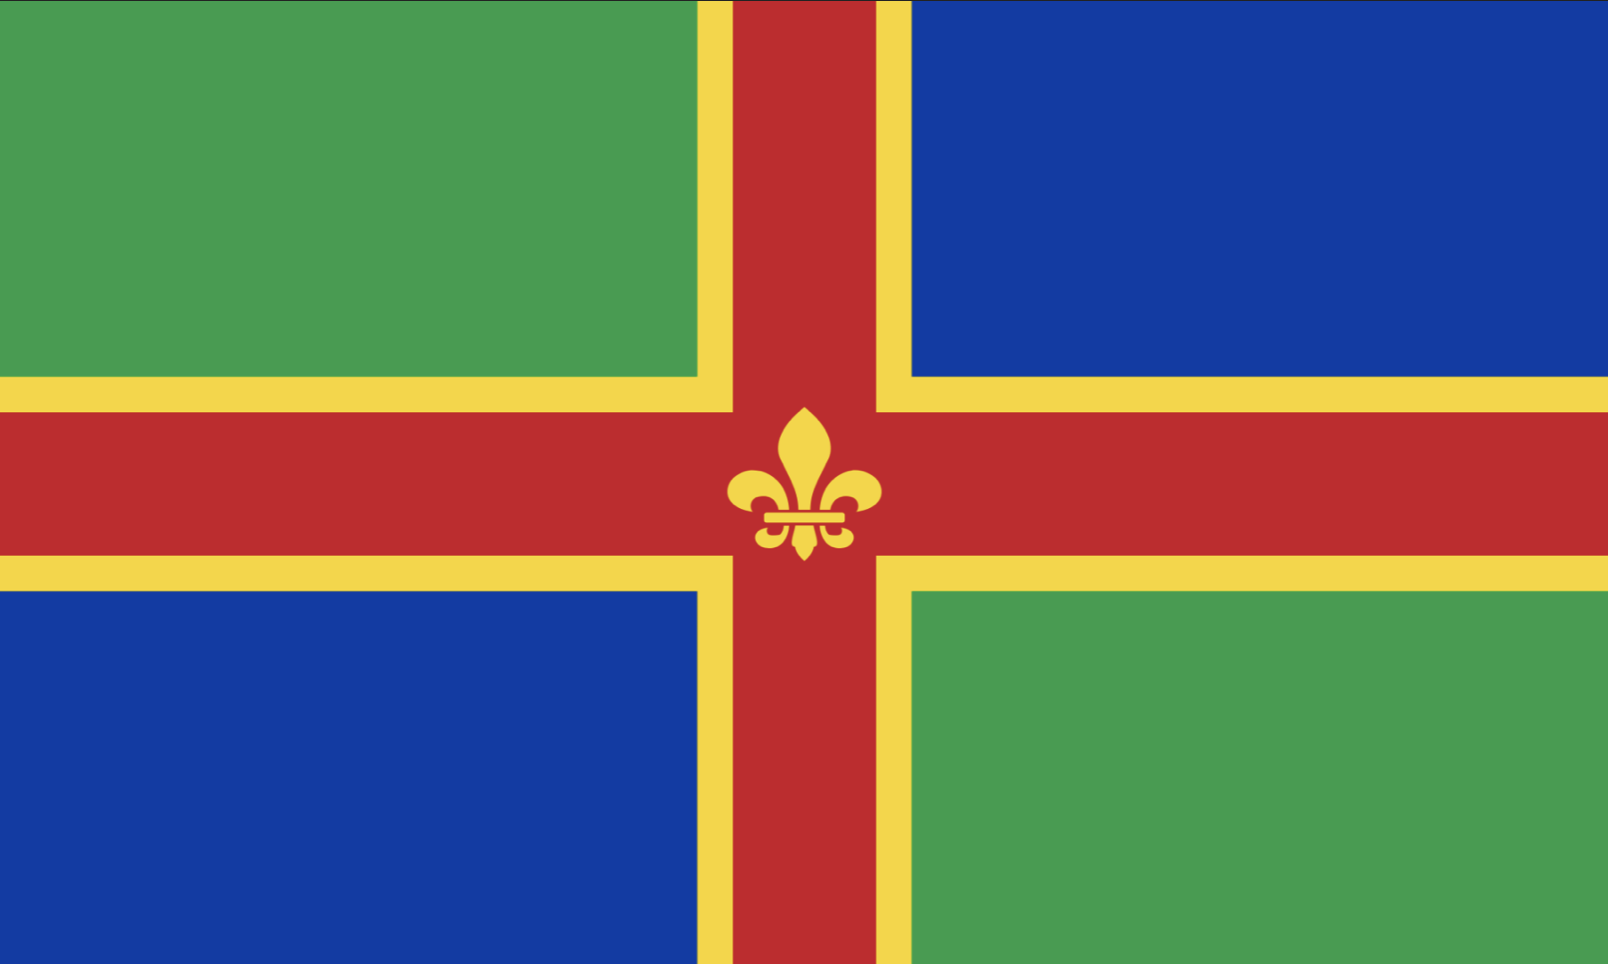 Lincolnshire Day The Lincolnshire flag